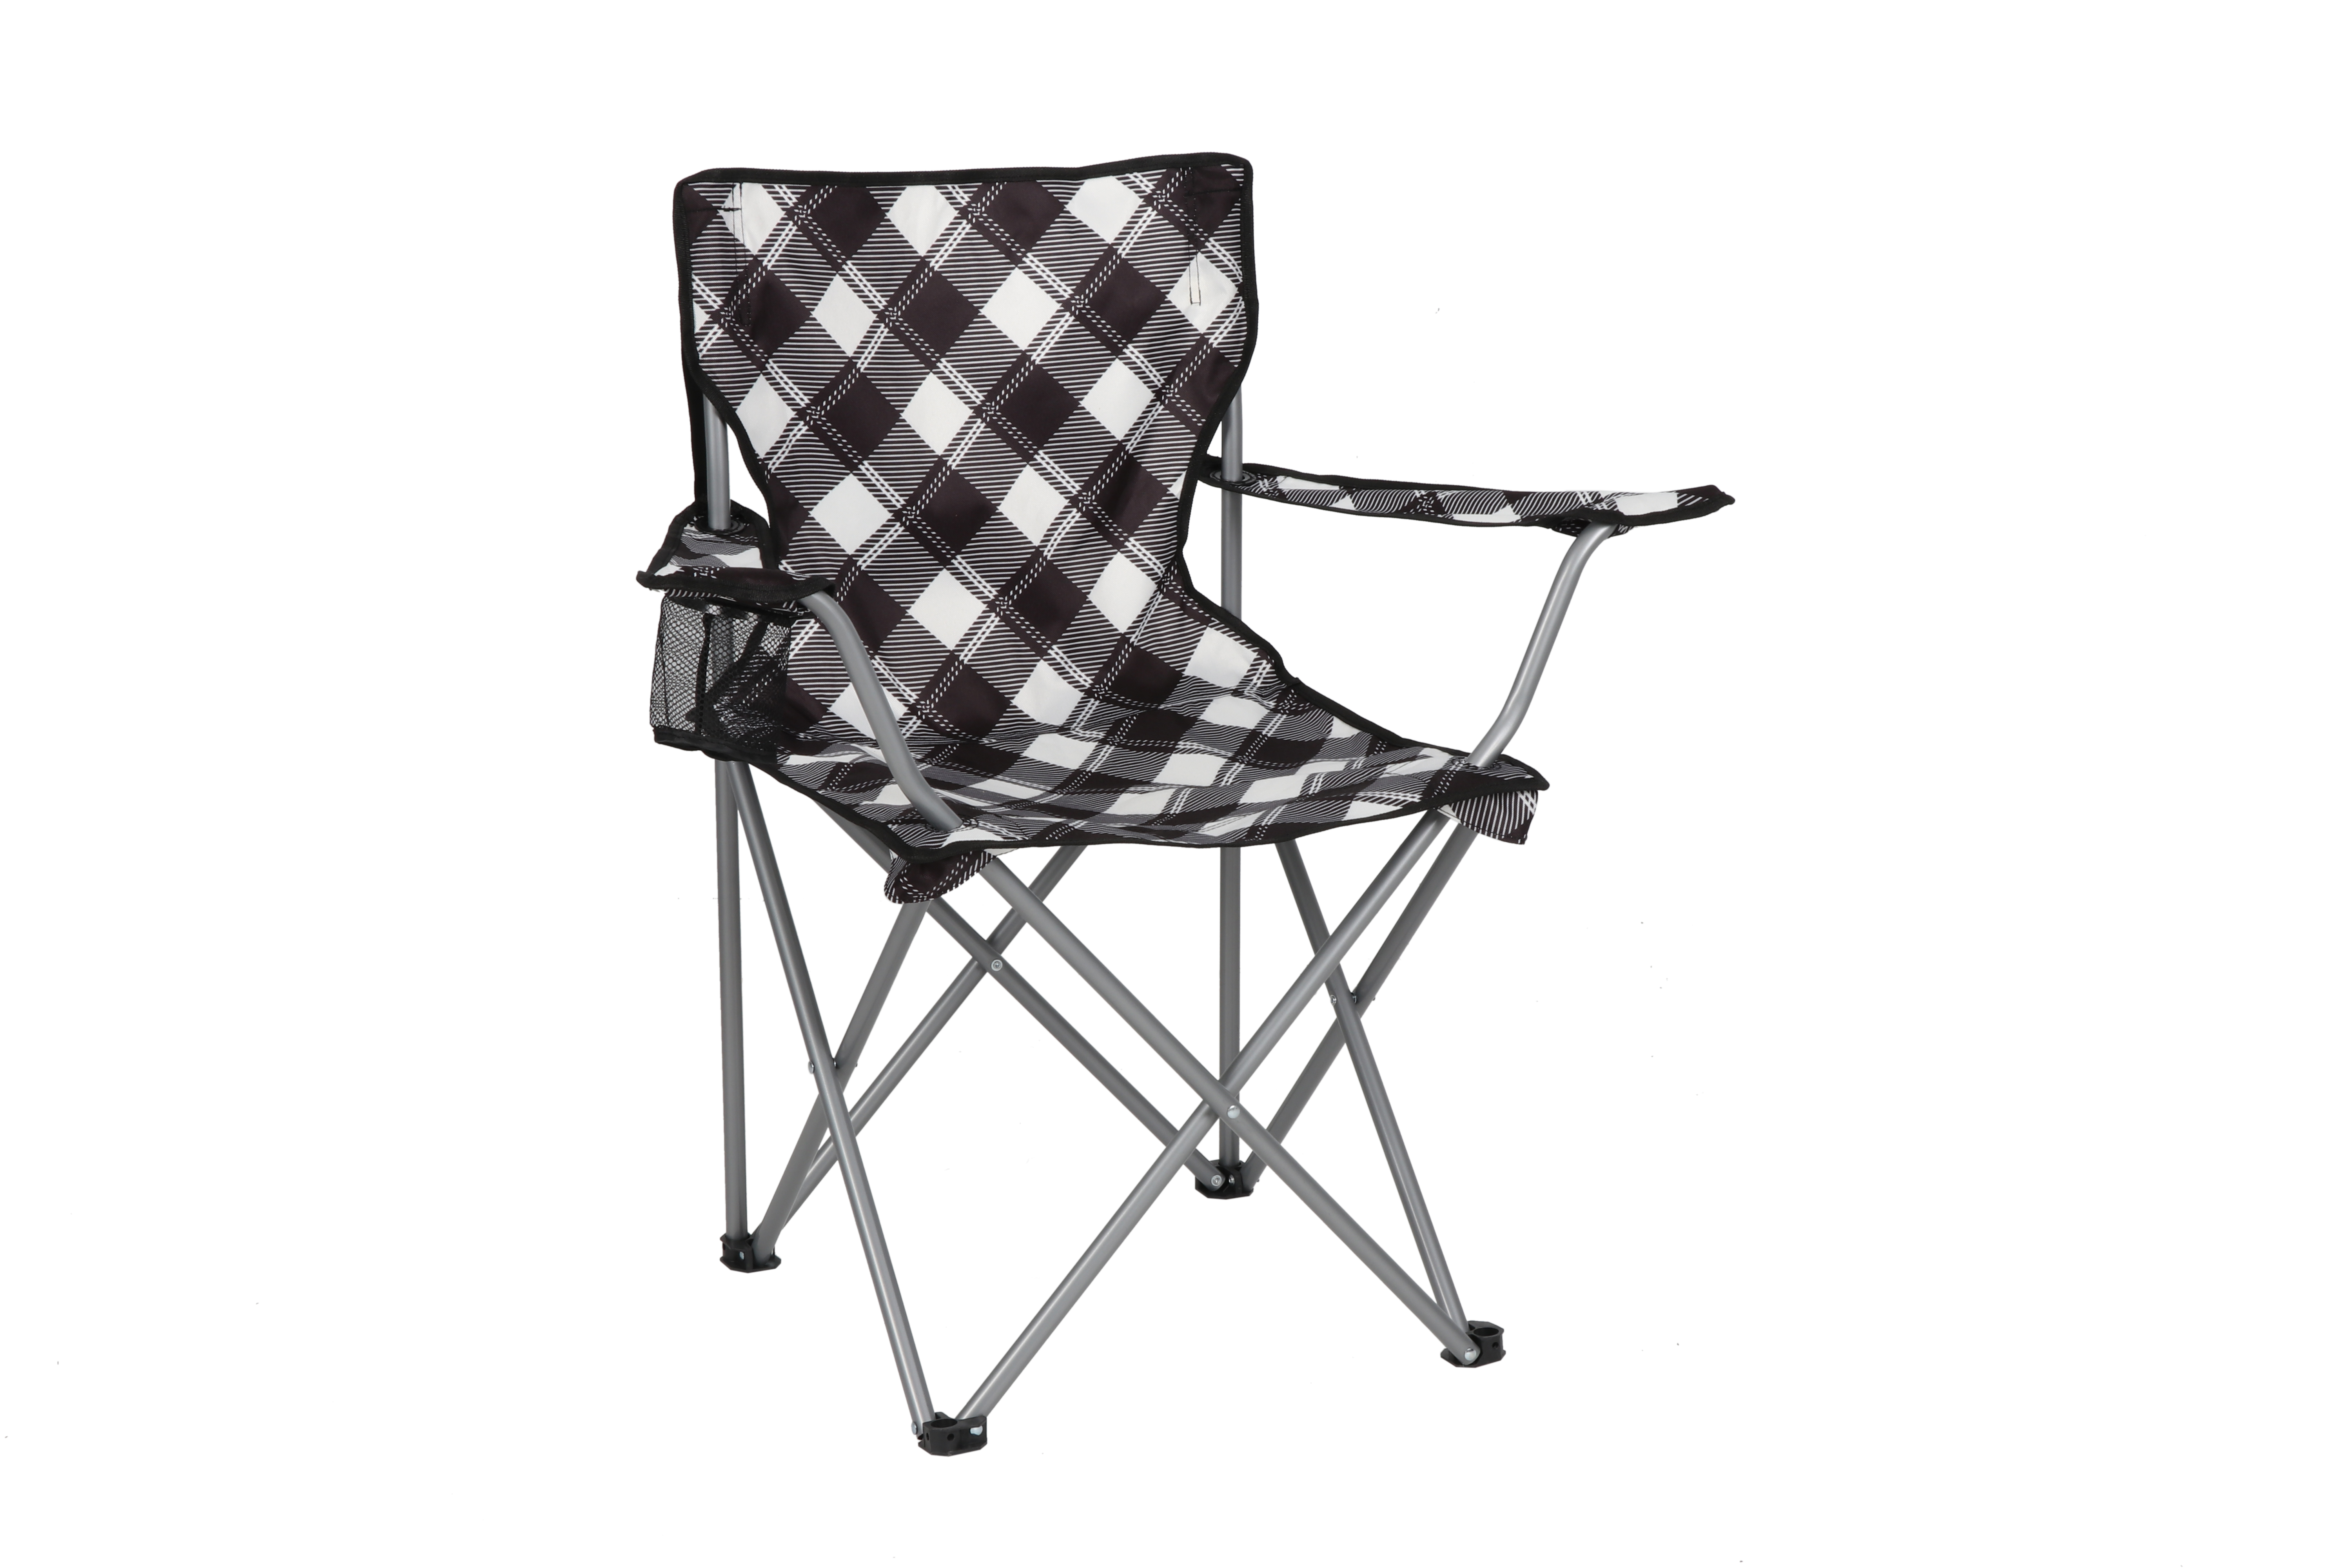 Ozark Trail Blanket and Two Chair Combo, Adult, Black White - image 3 of 14